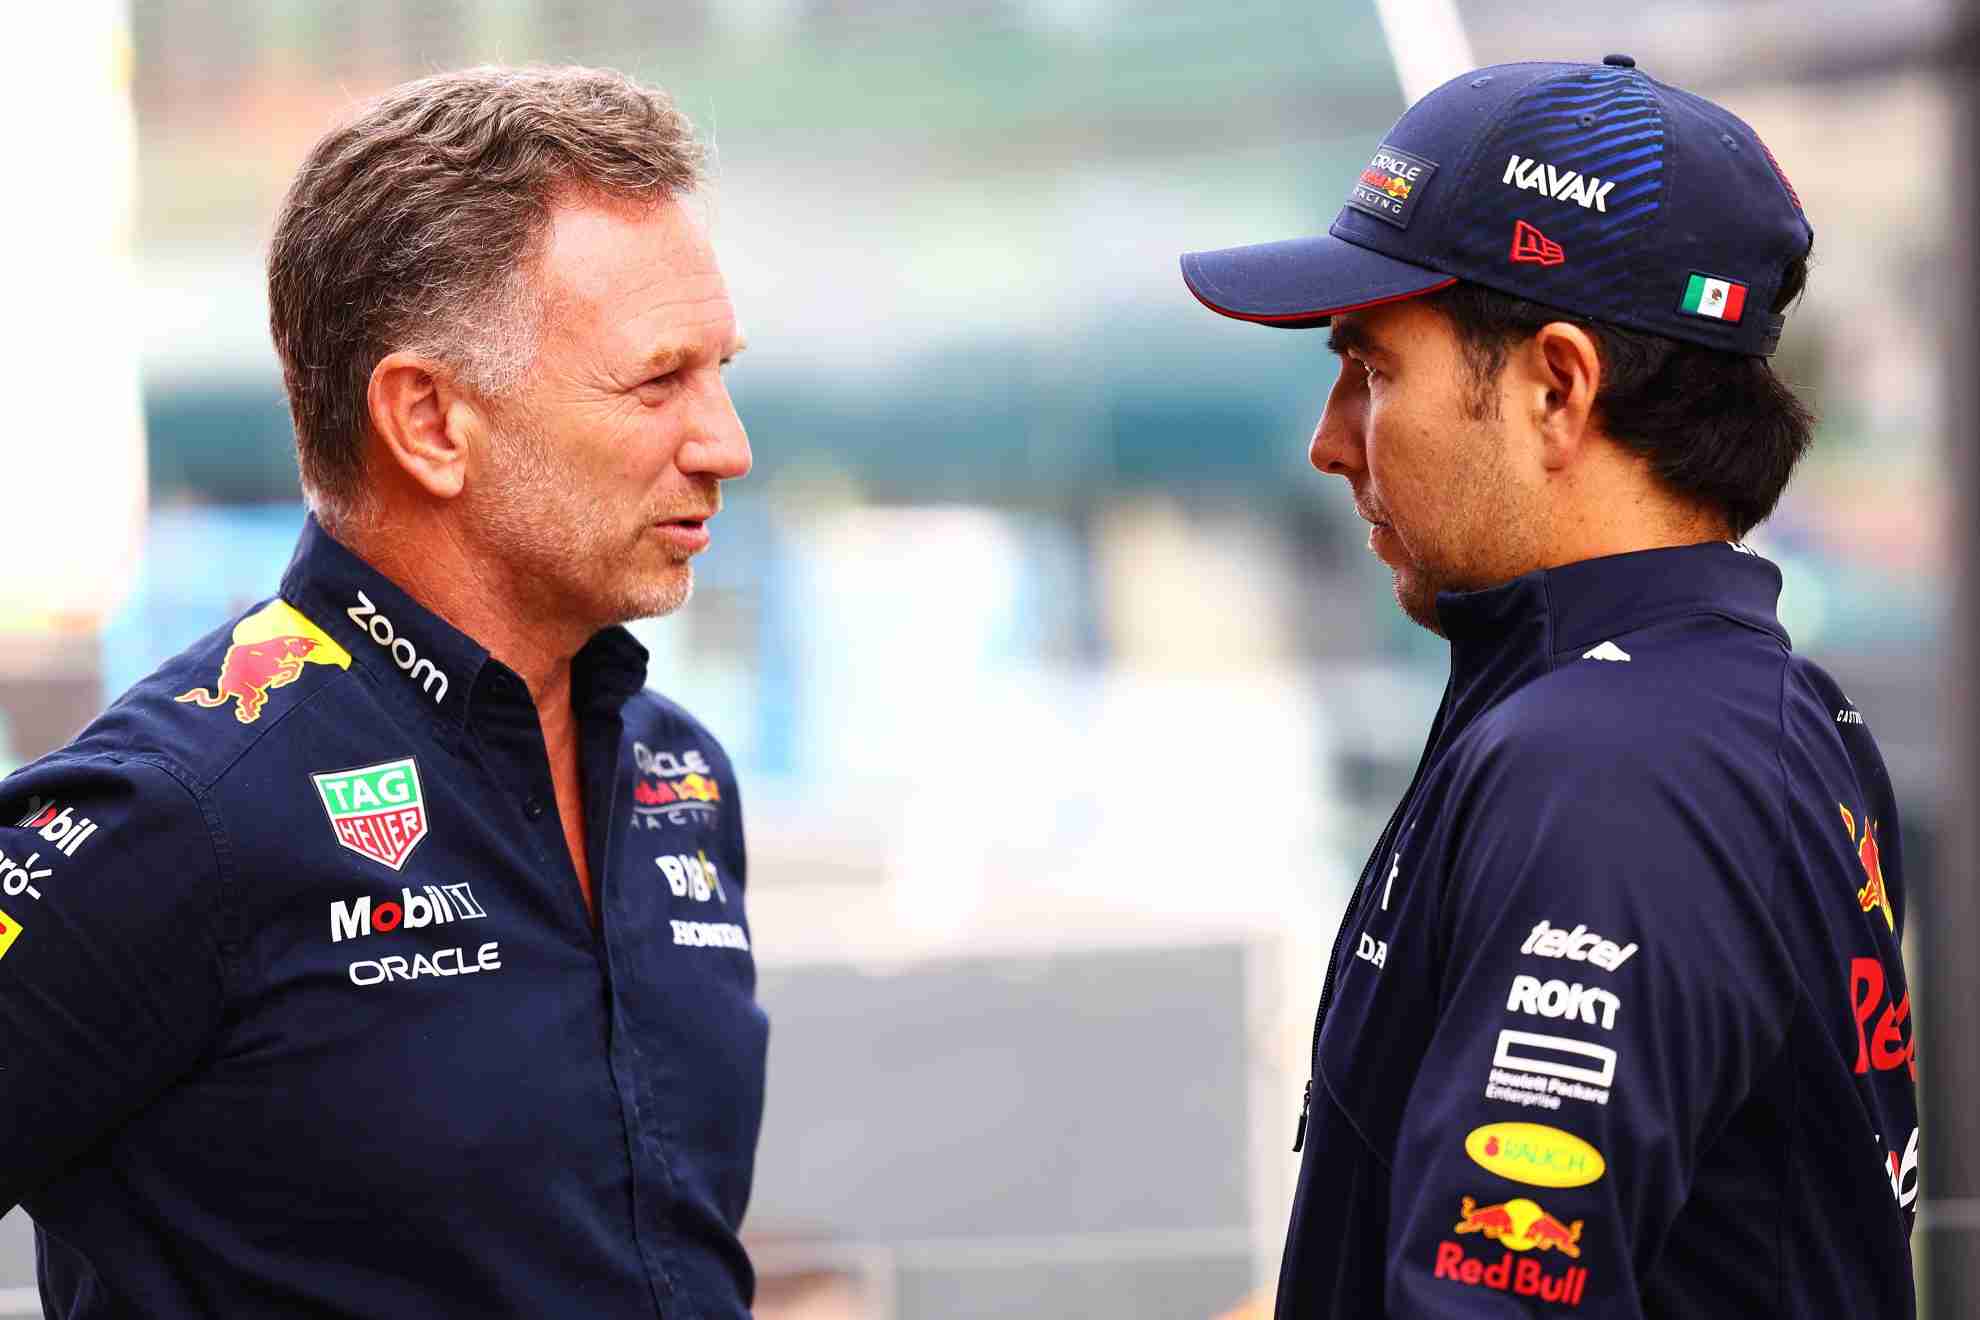 Horner Urges Perez to Recover After "Terrible" Weekend